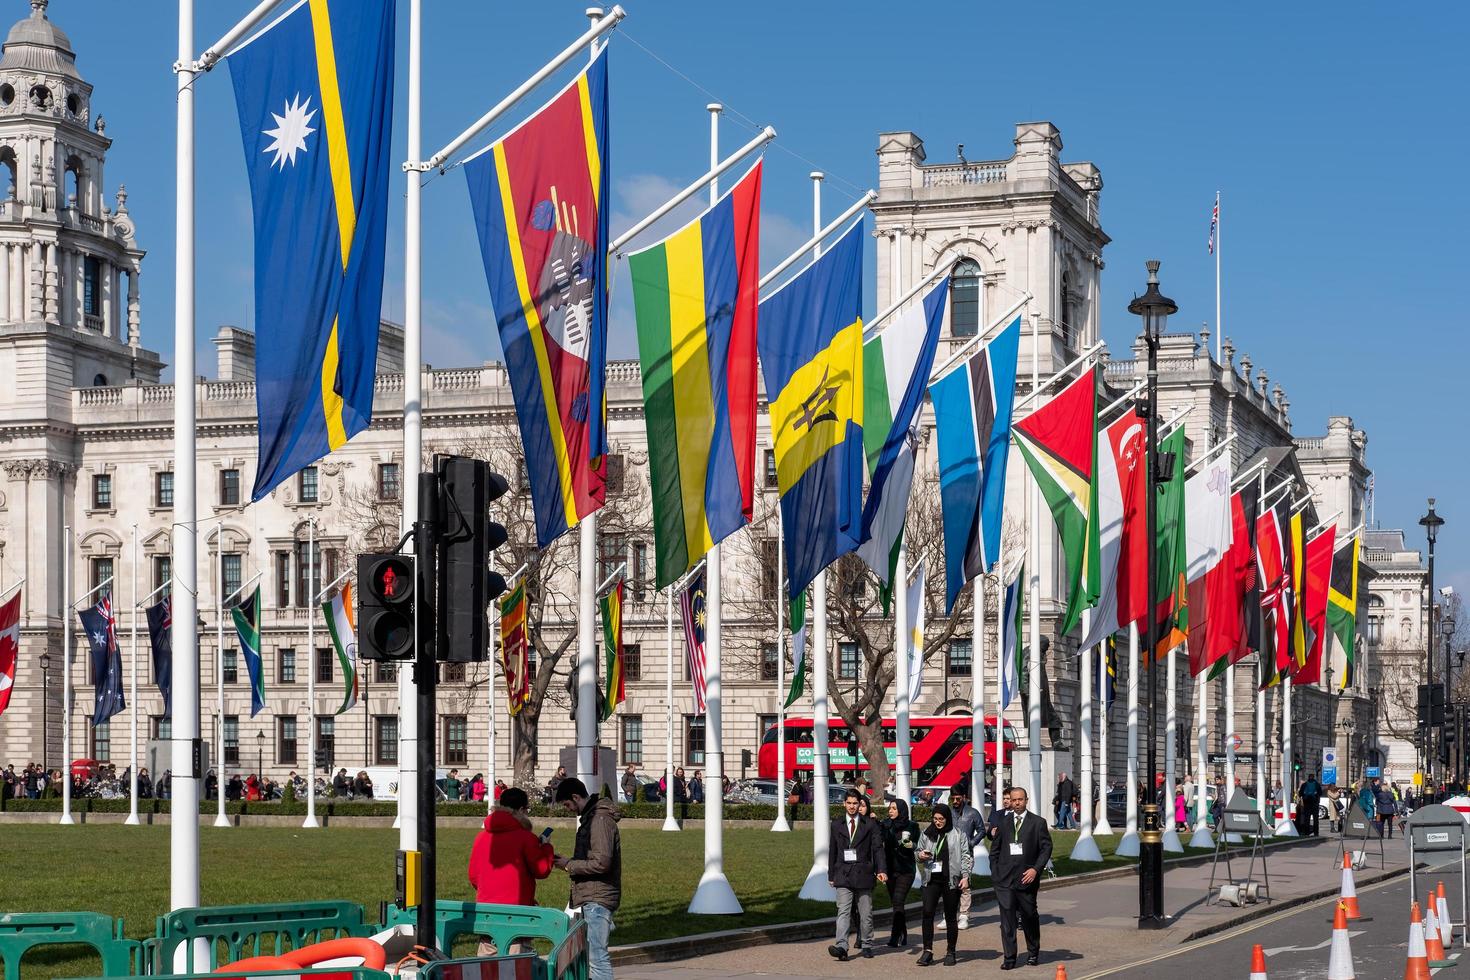 LONDON, UK, 2018. Flags flying in Parliament Square in London on March 13, 2016. Unidentified people photo